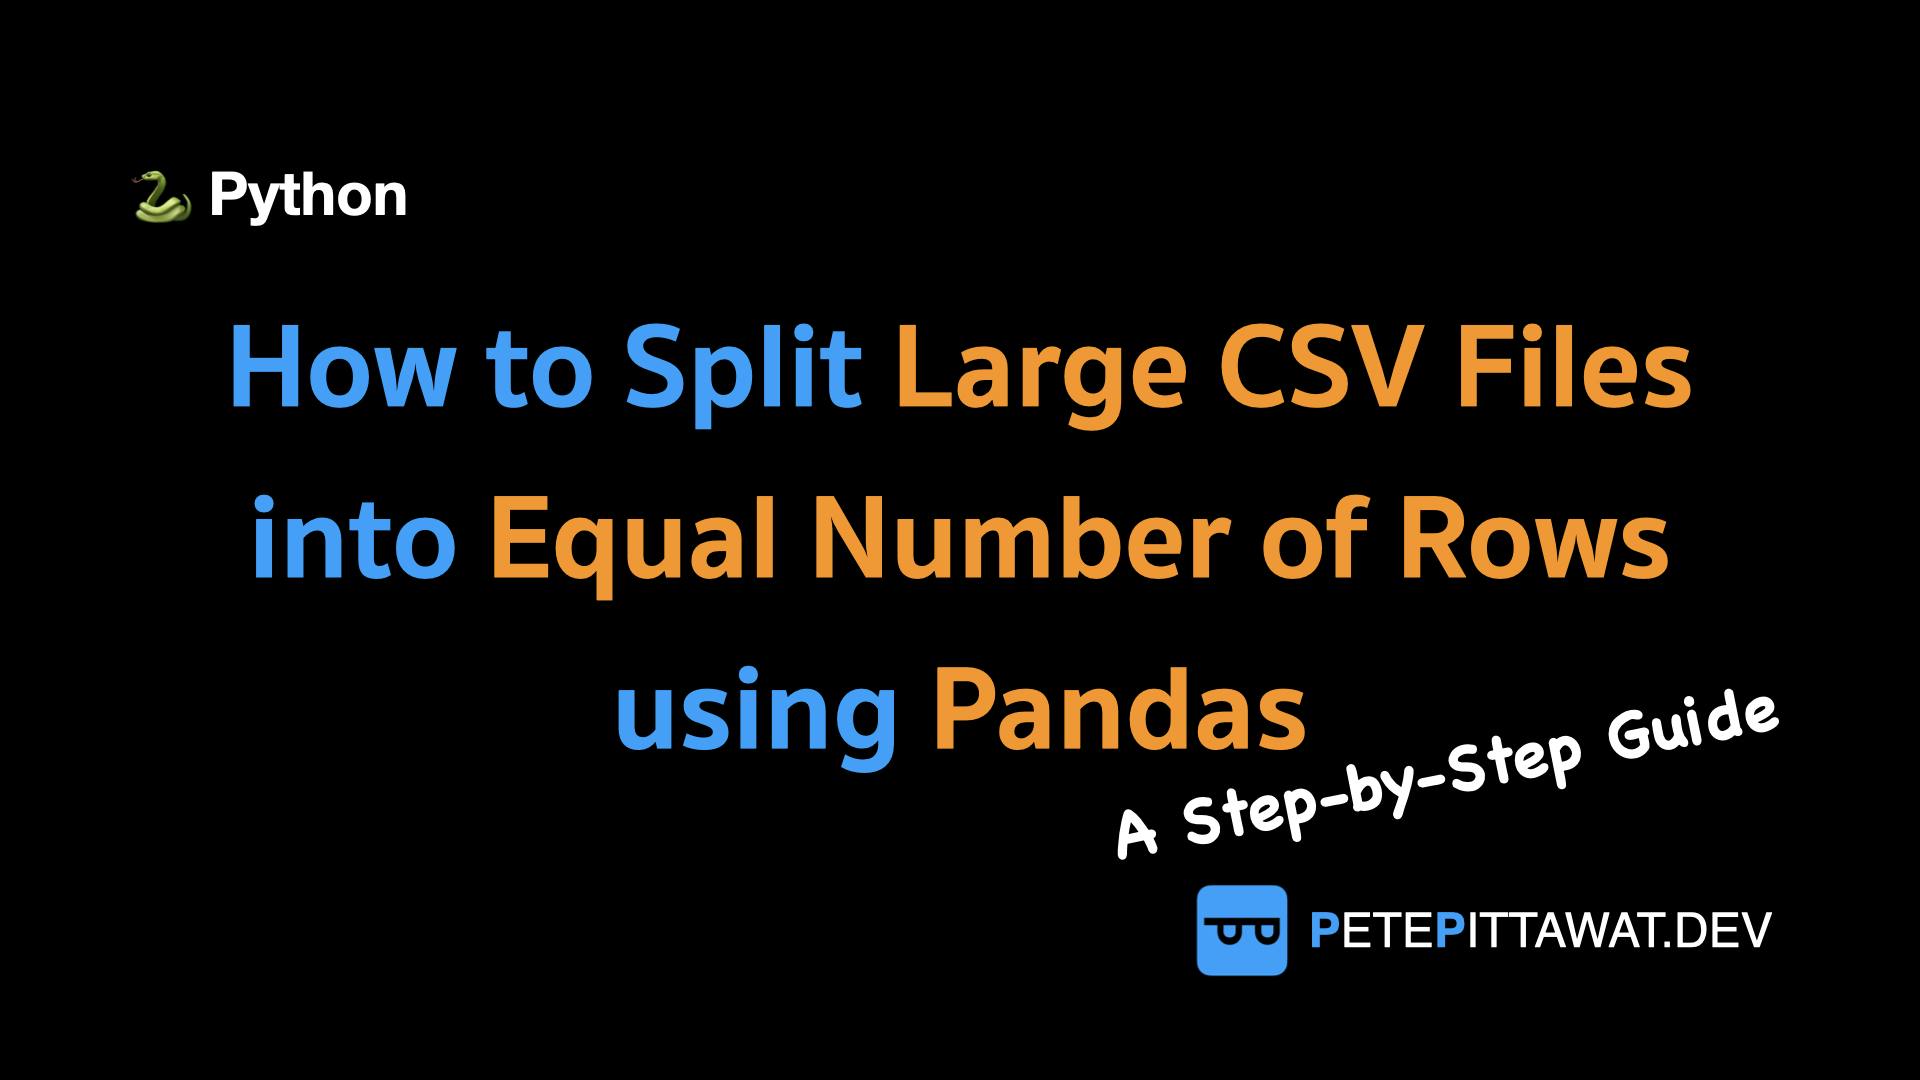 Cover Image for How to Split Large CSV Files into Equal Number of Rows using Pandas: A Step-by-Step Guide